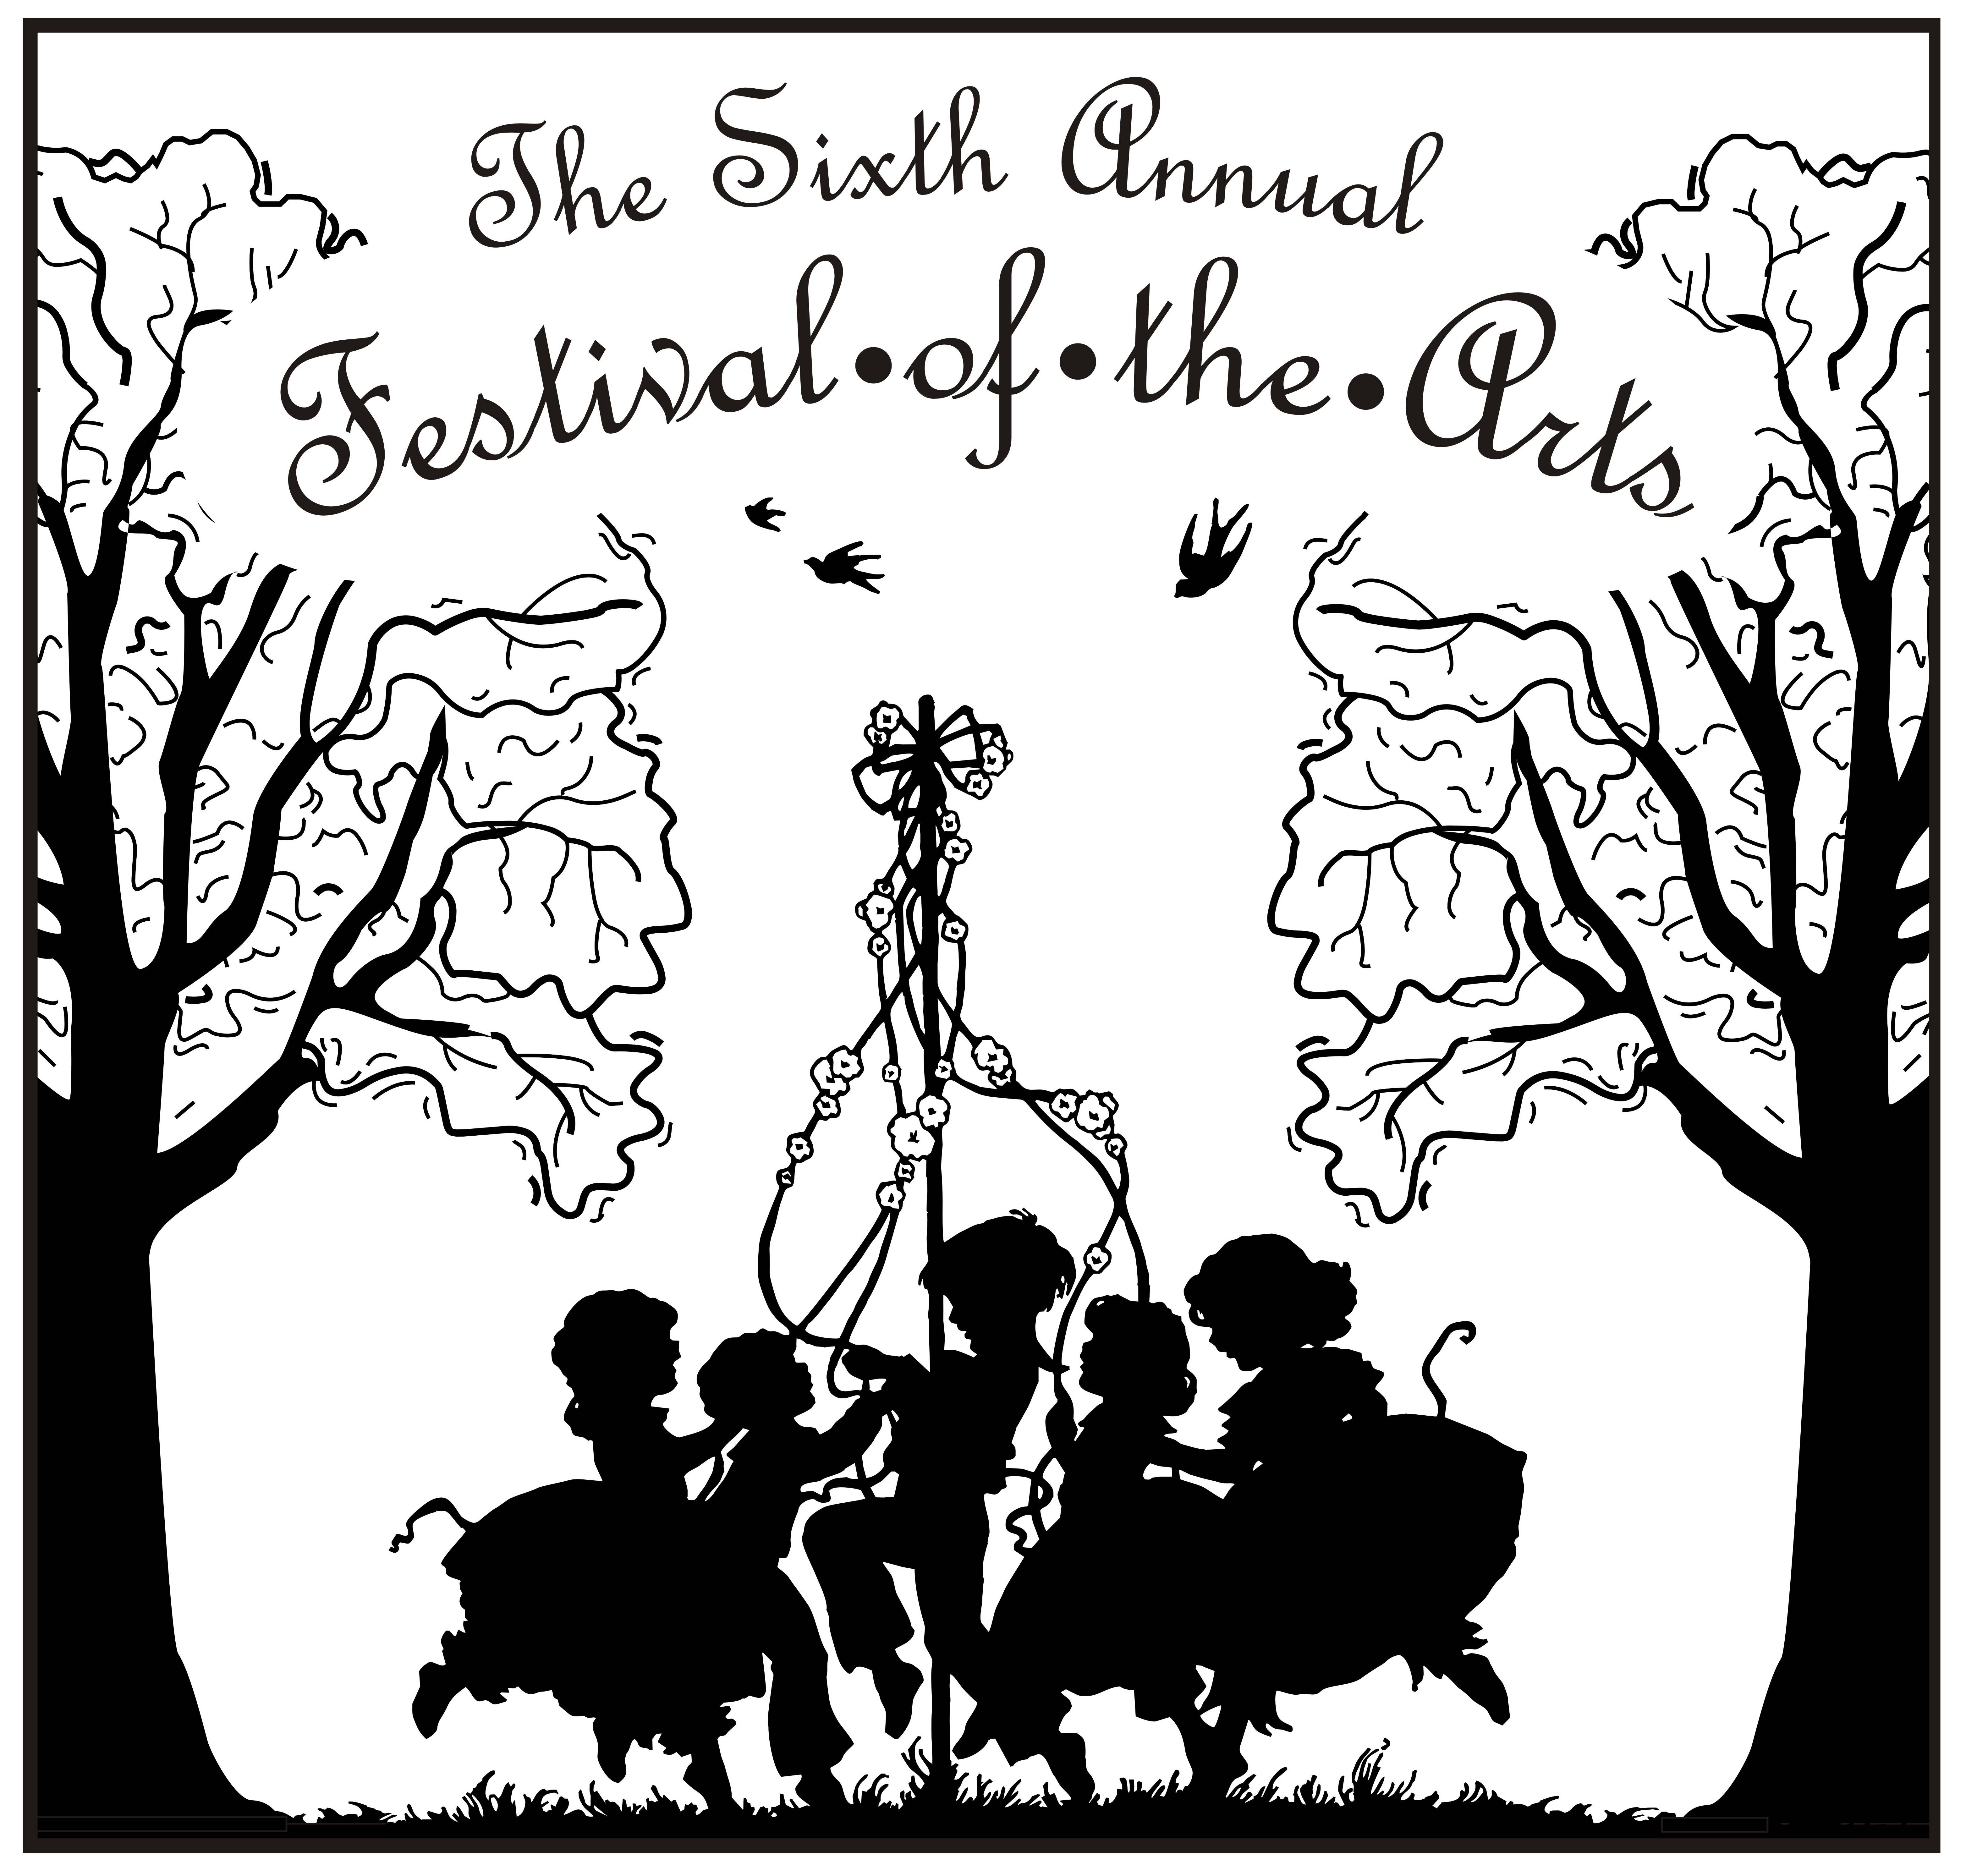 Sixth Annual Festival of the Arts